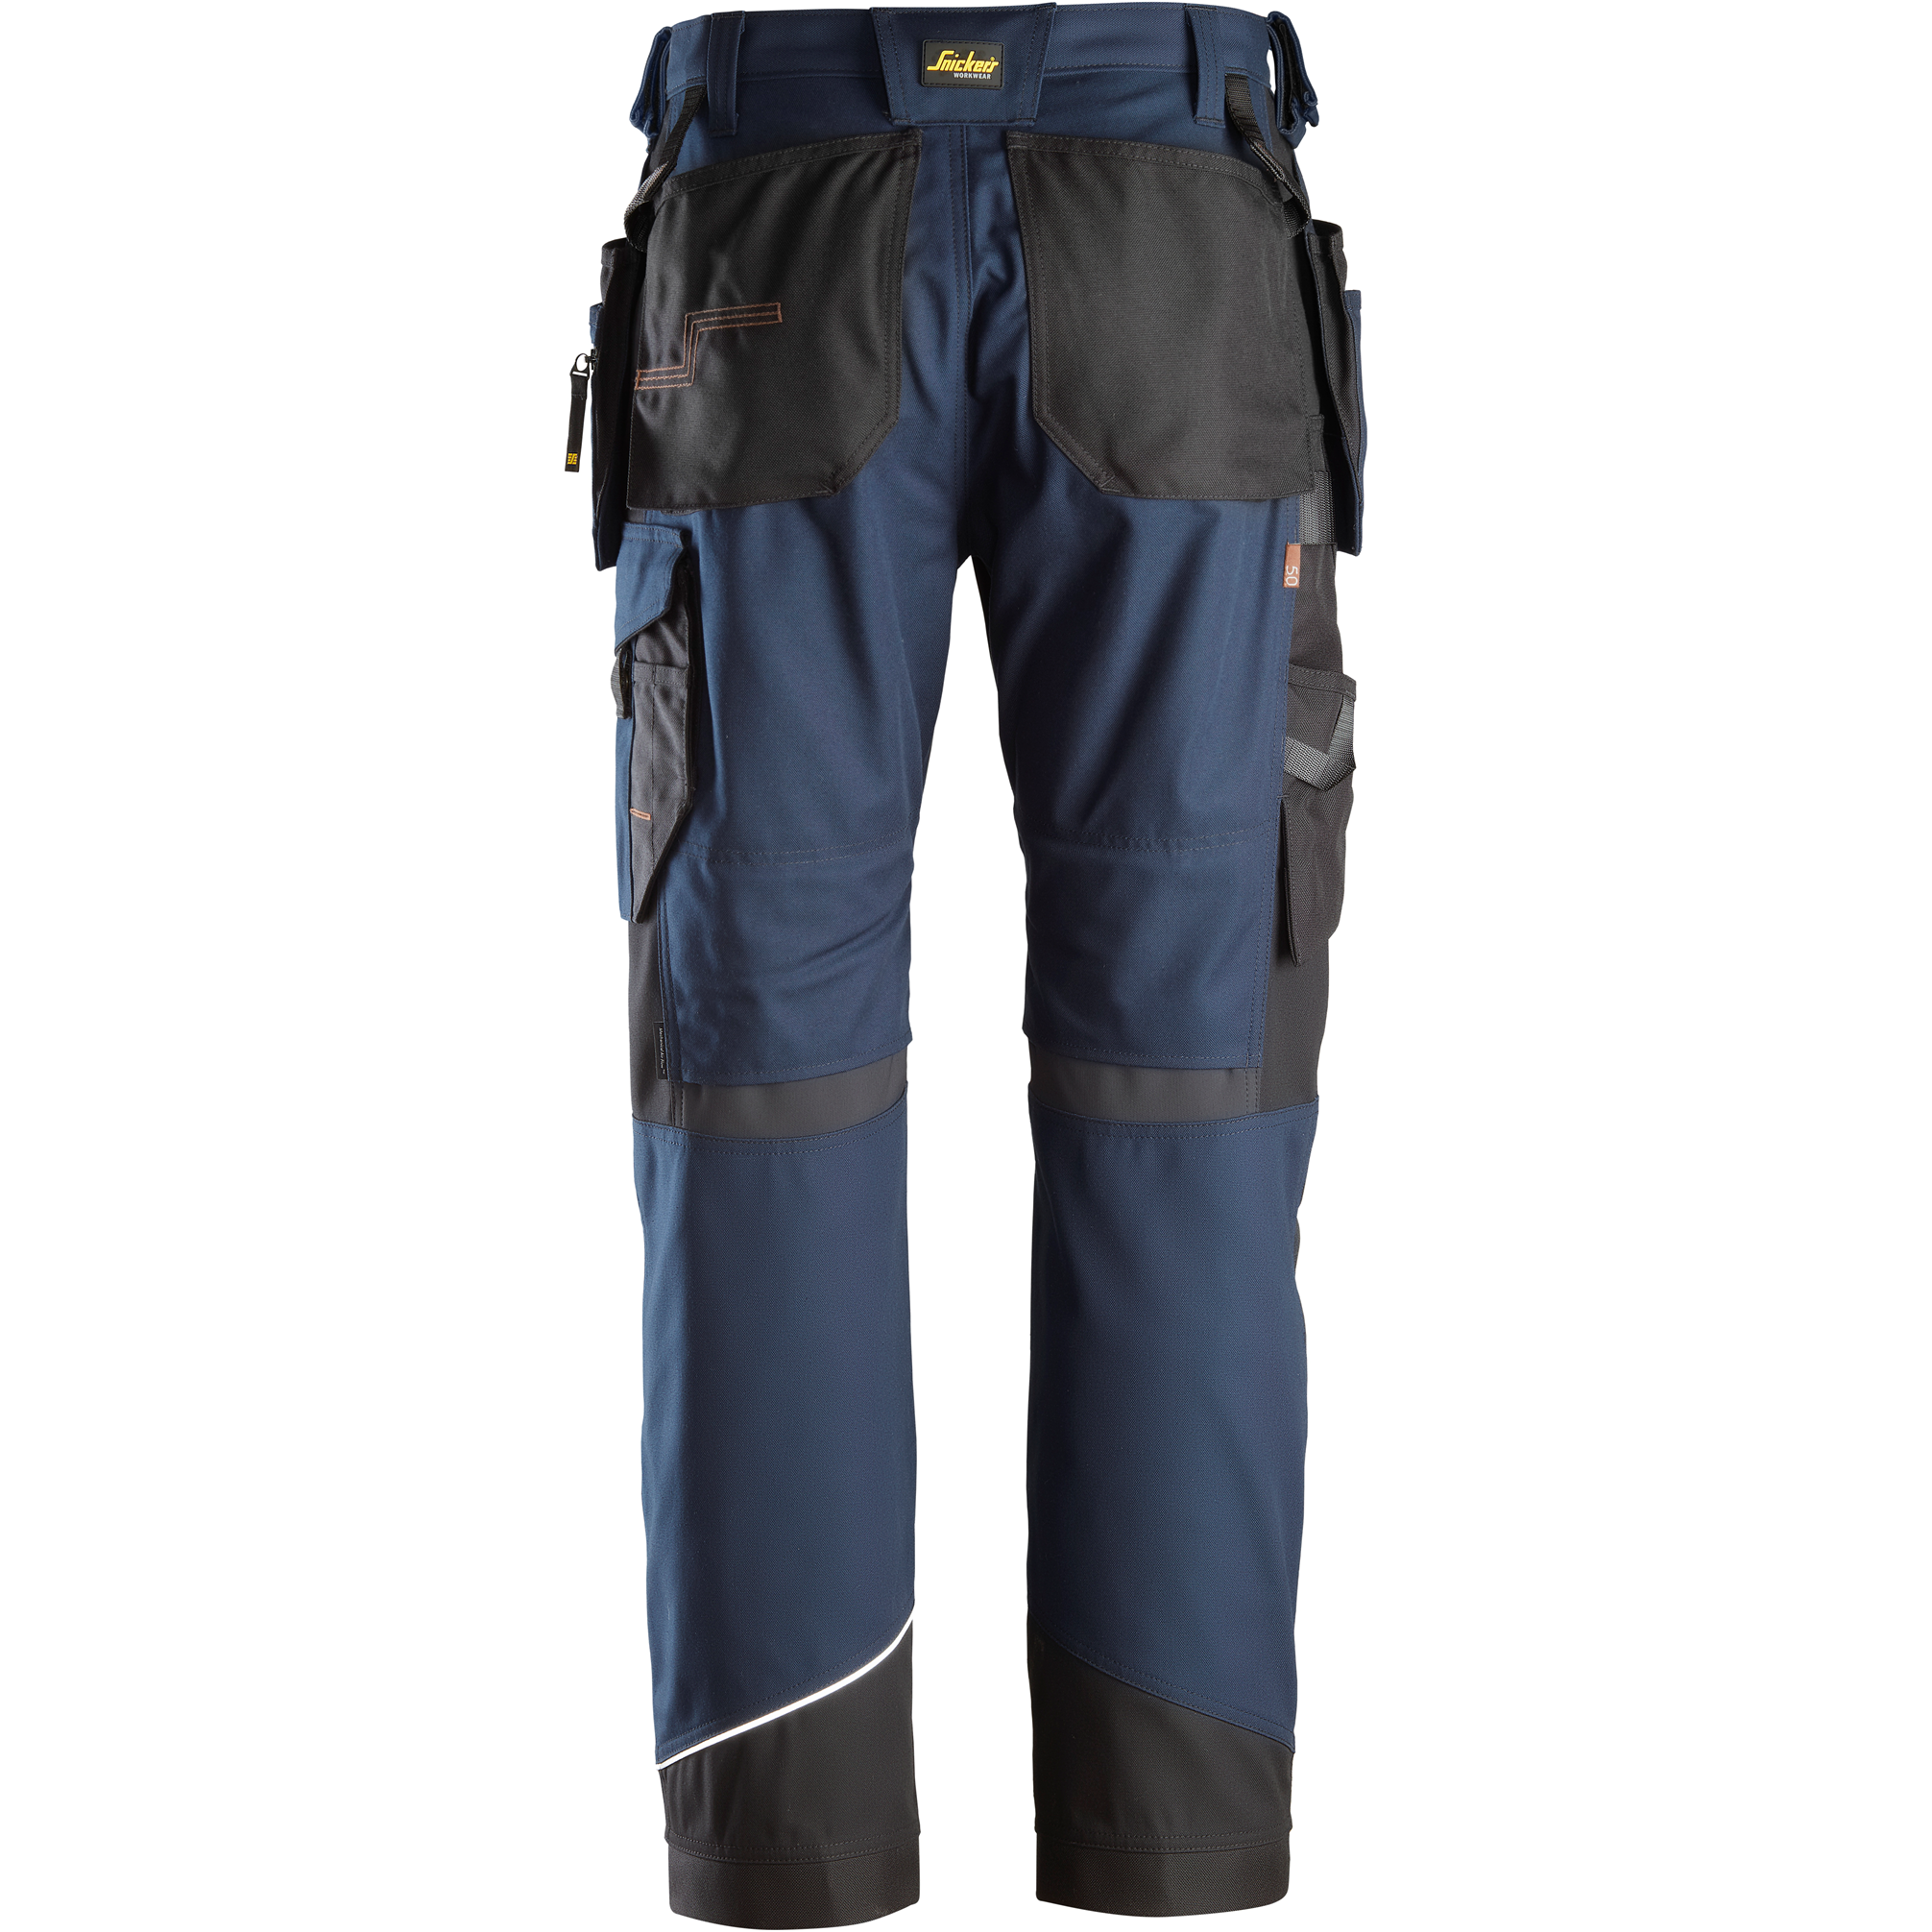 Snickers 6214 Canvas+ Work Trousers with Holster Pockets Navy/Black